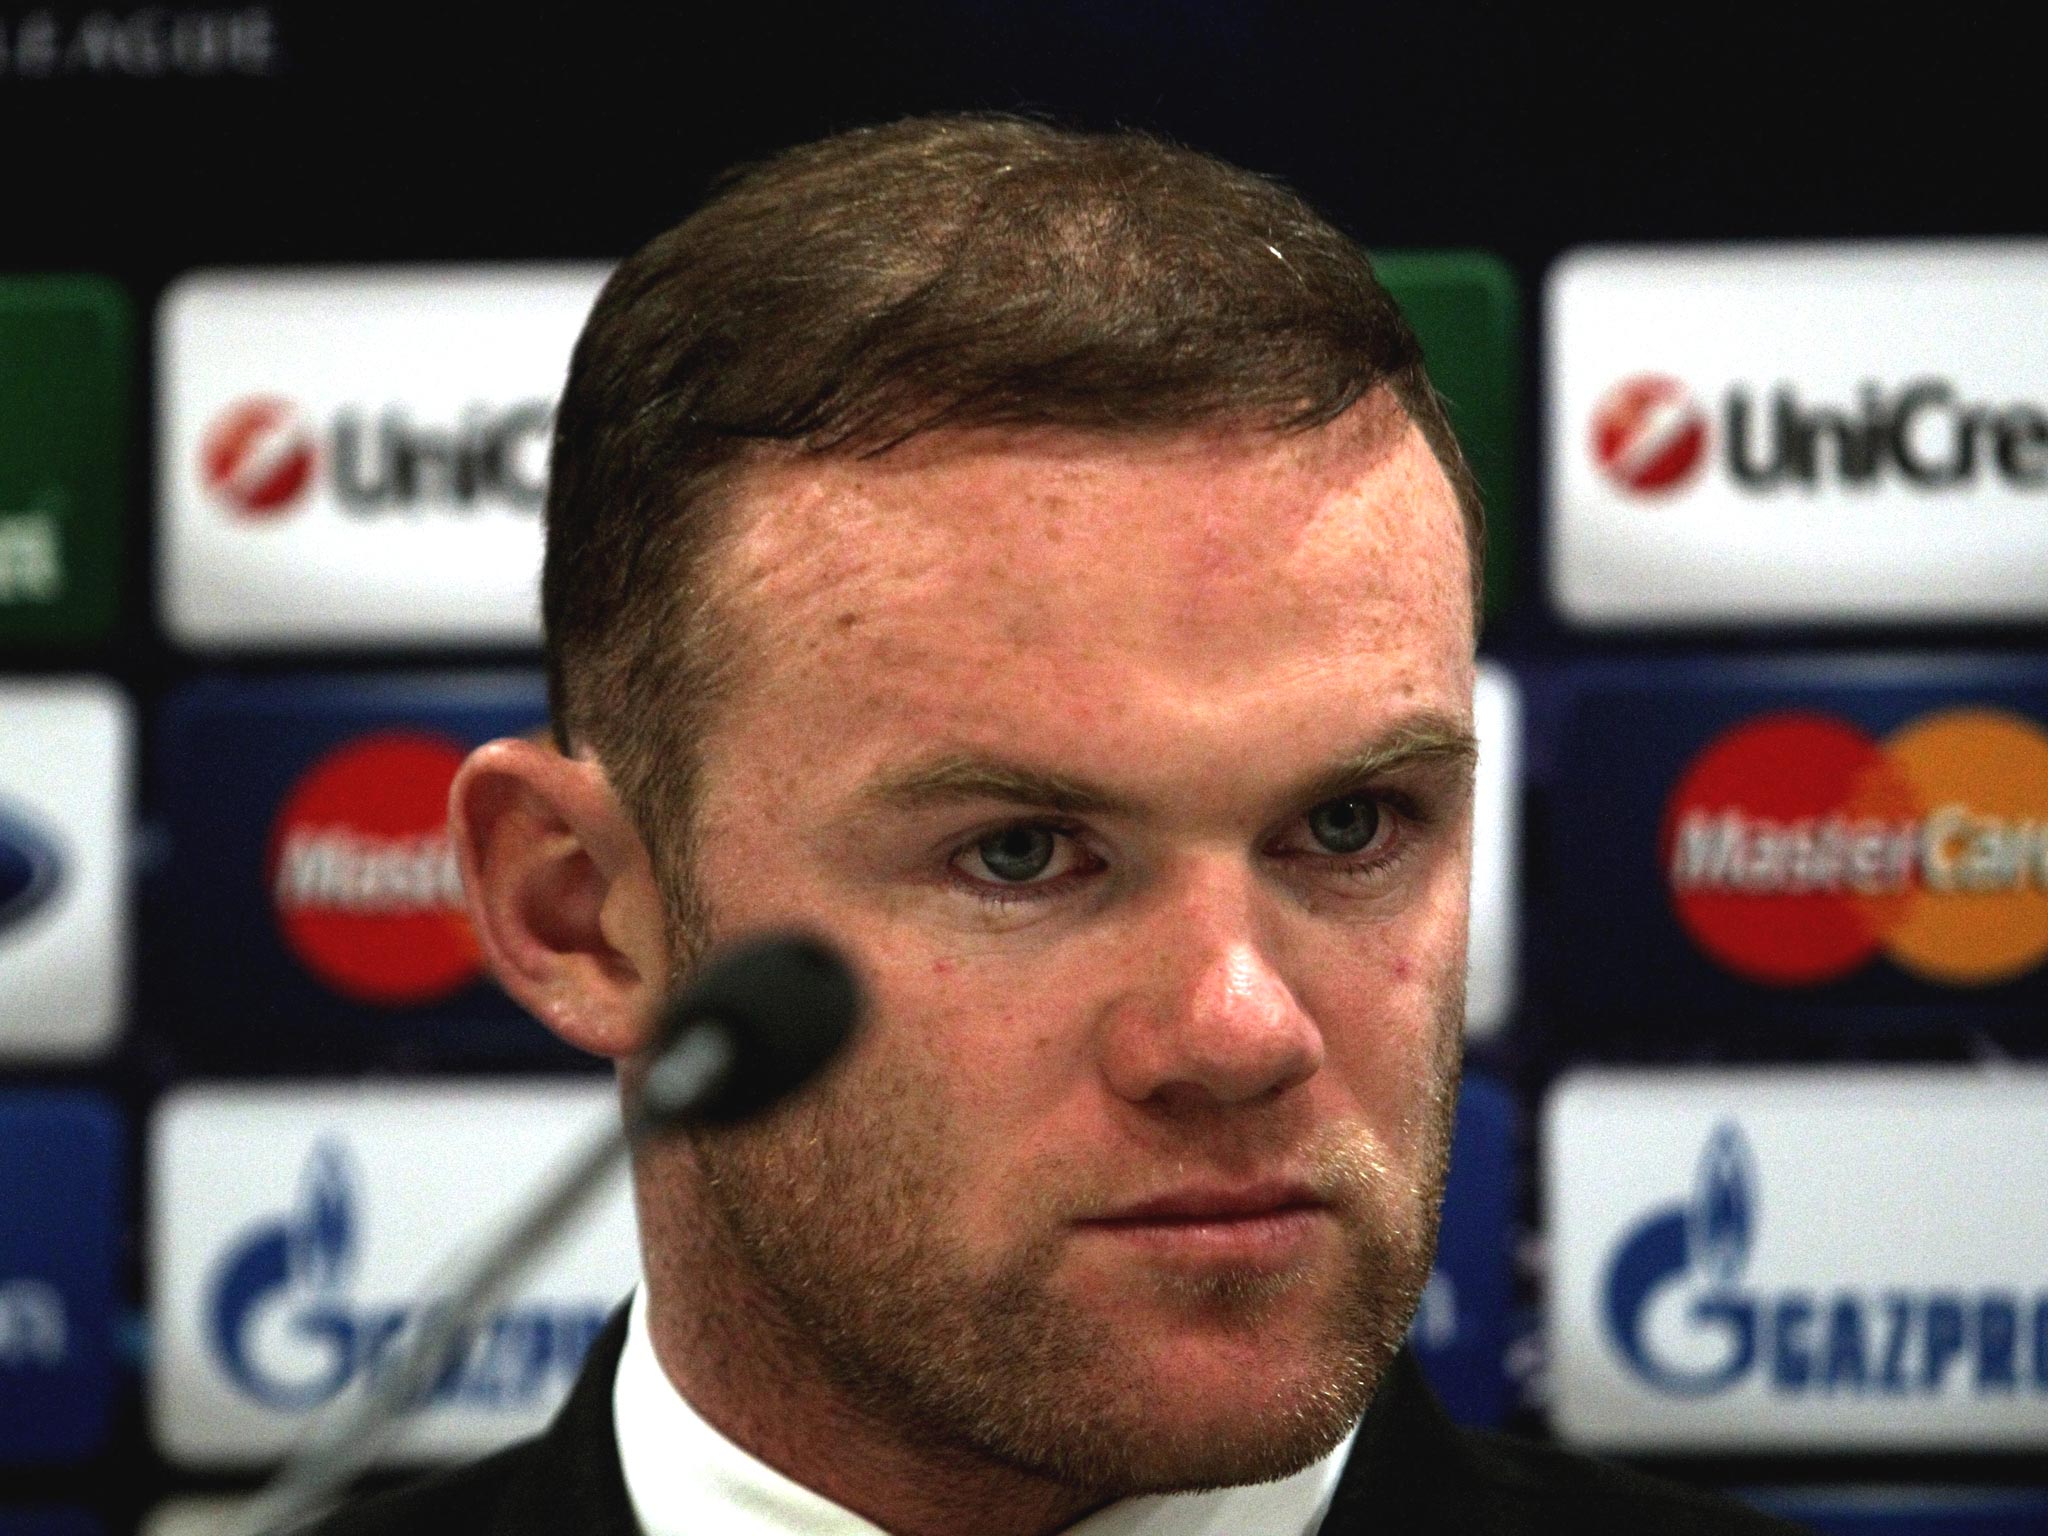 Manchester United striker Wayne Rooney gave an analysis of Bayern Munich at Arsenal and Barcelona at Manchester City